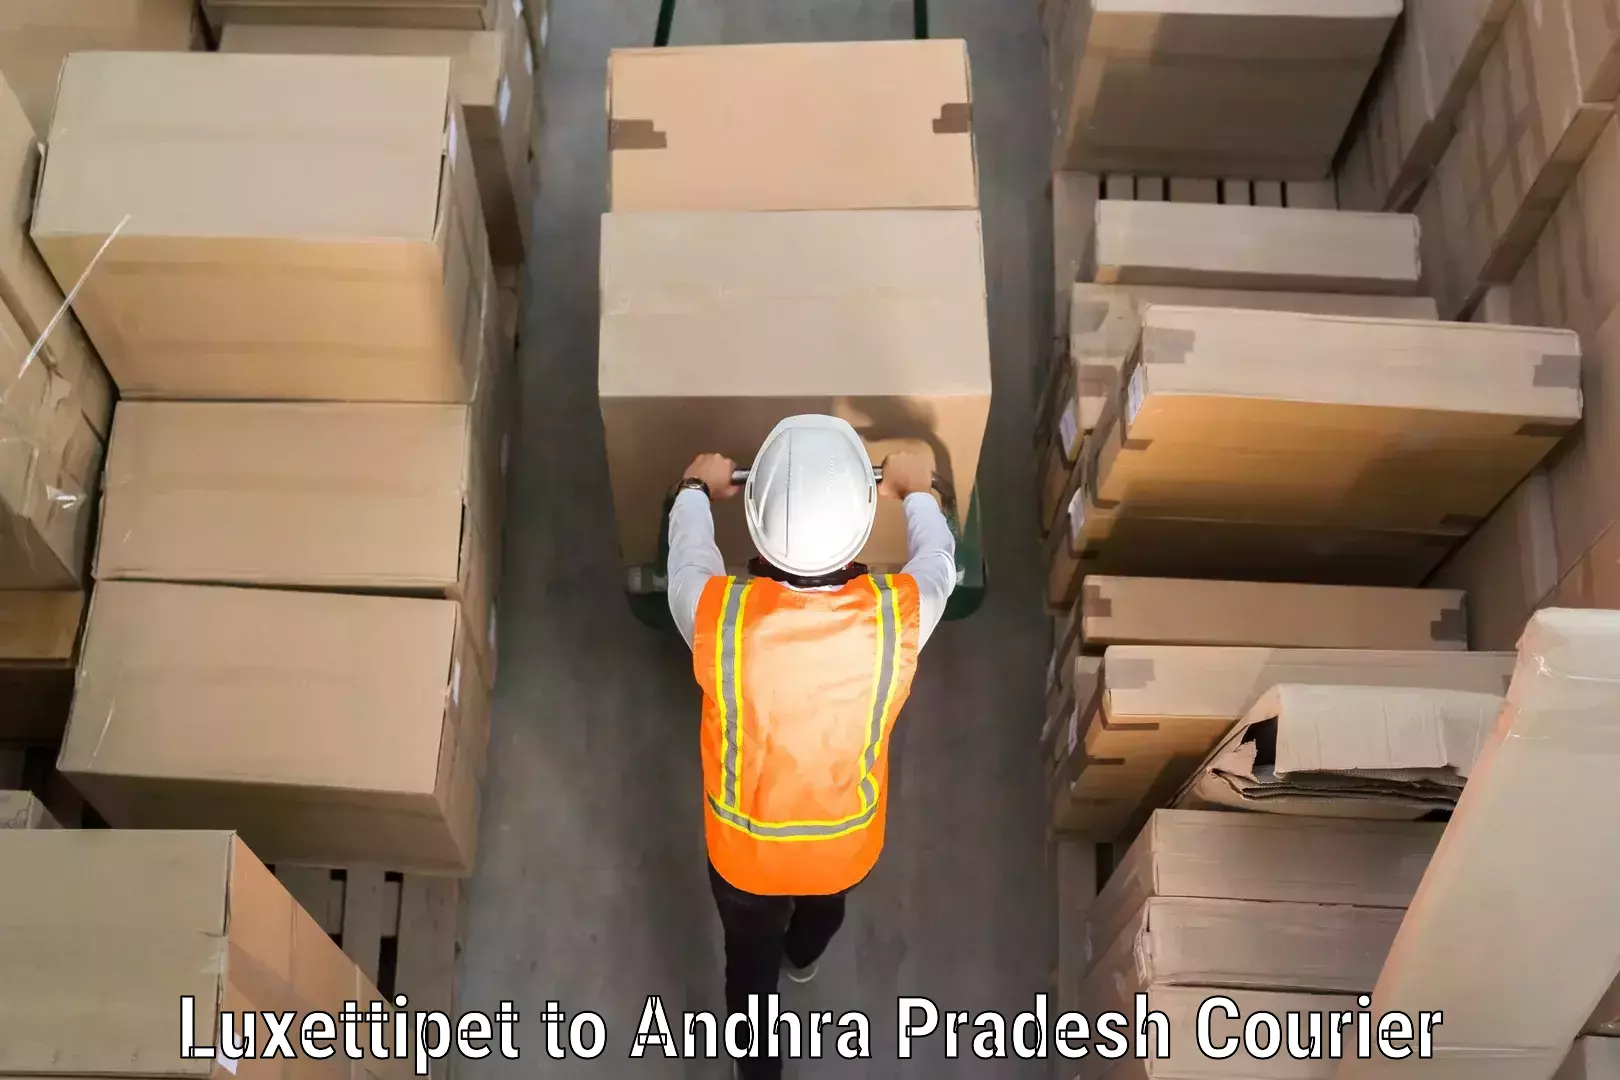 Baggage delivery technology Luxettipet to Visakhapatnam